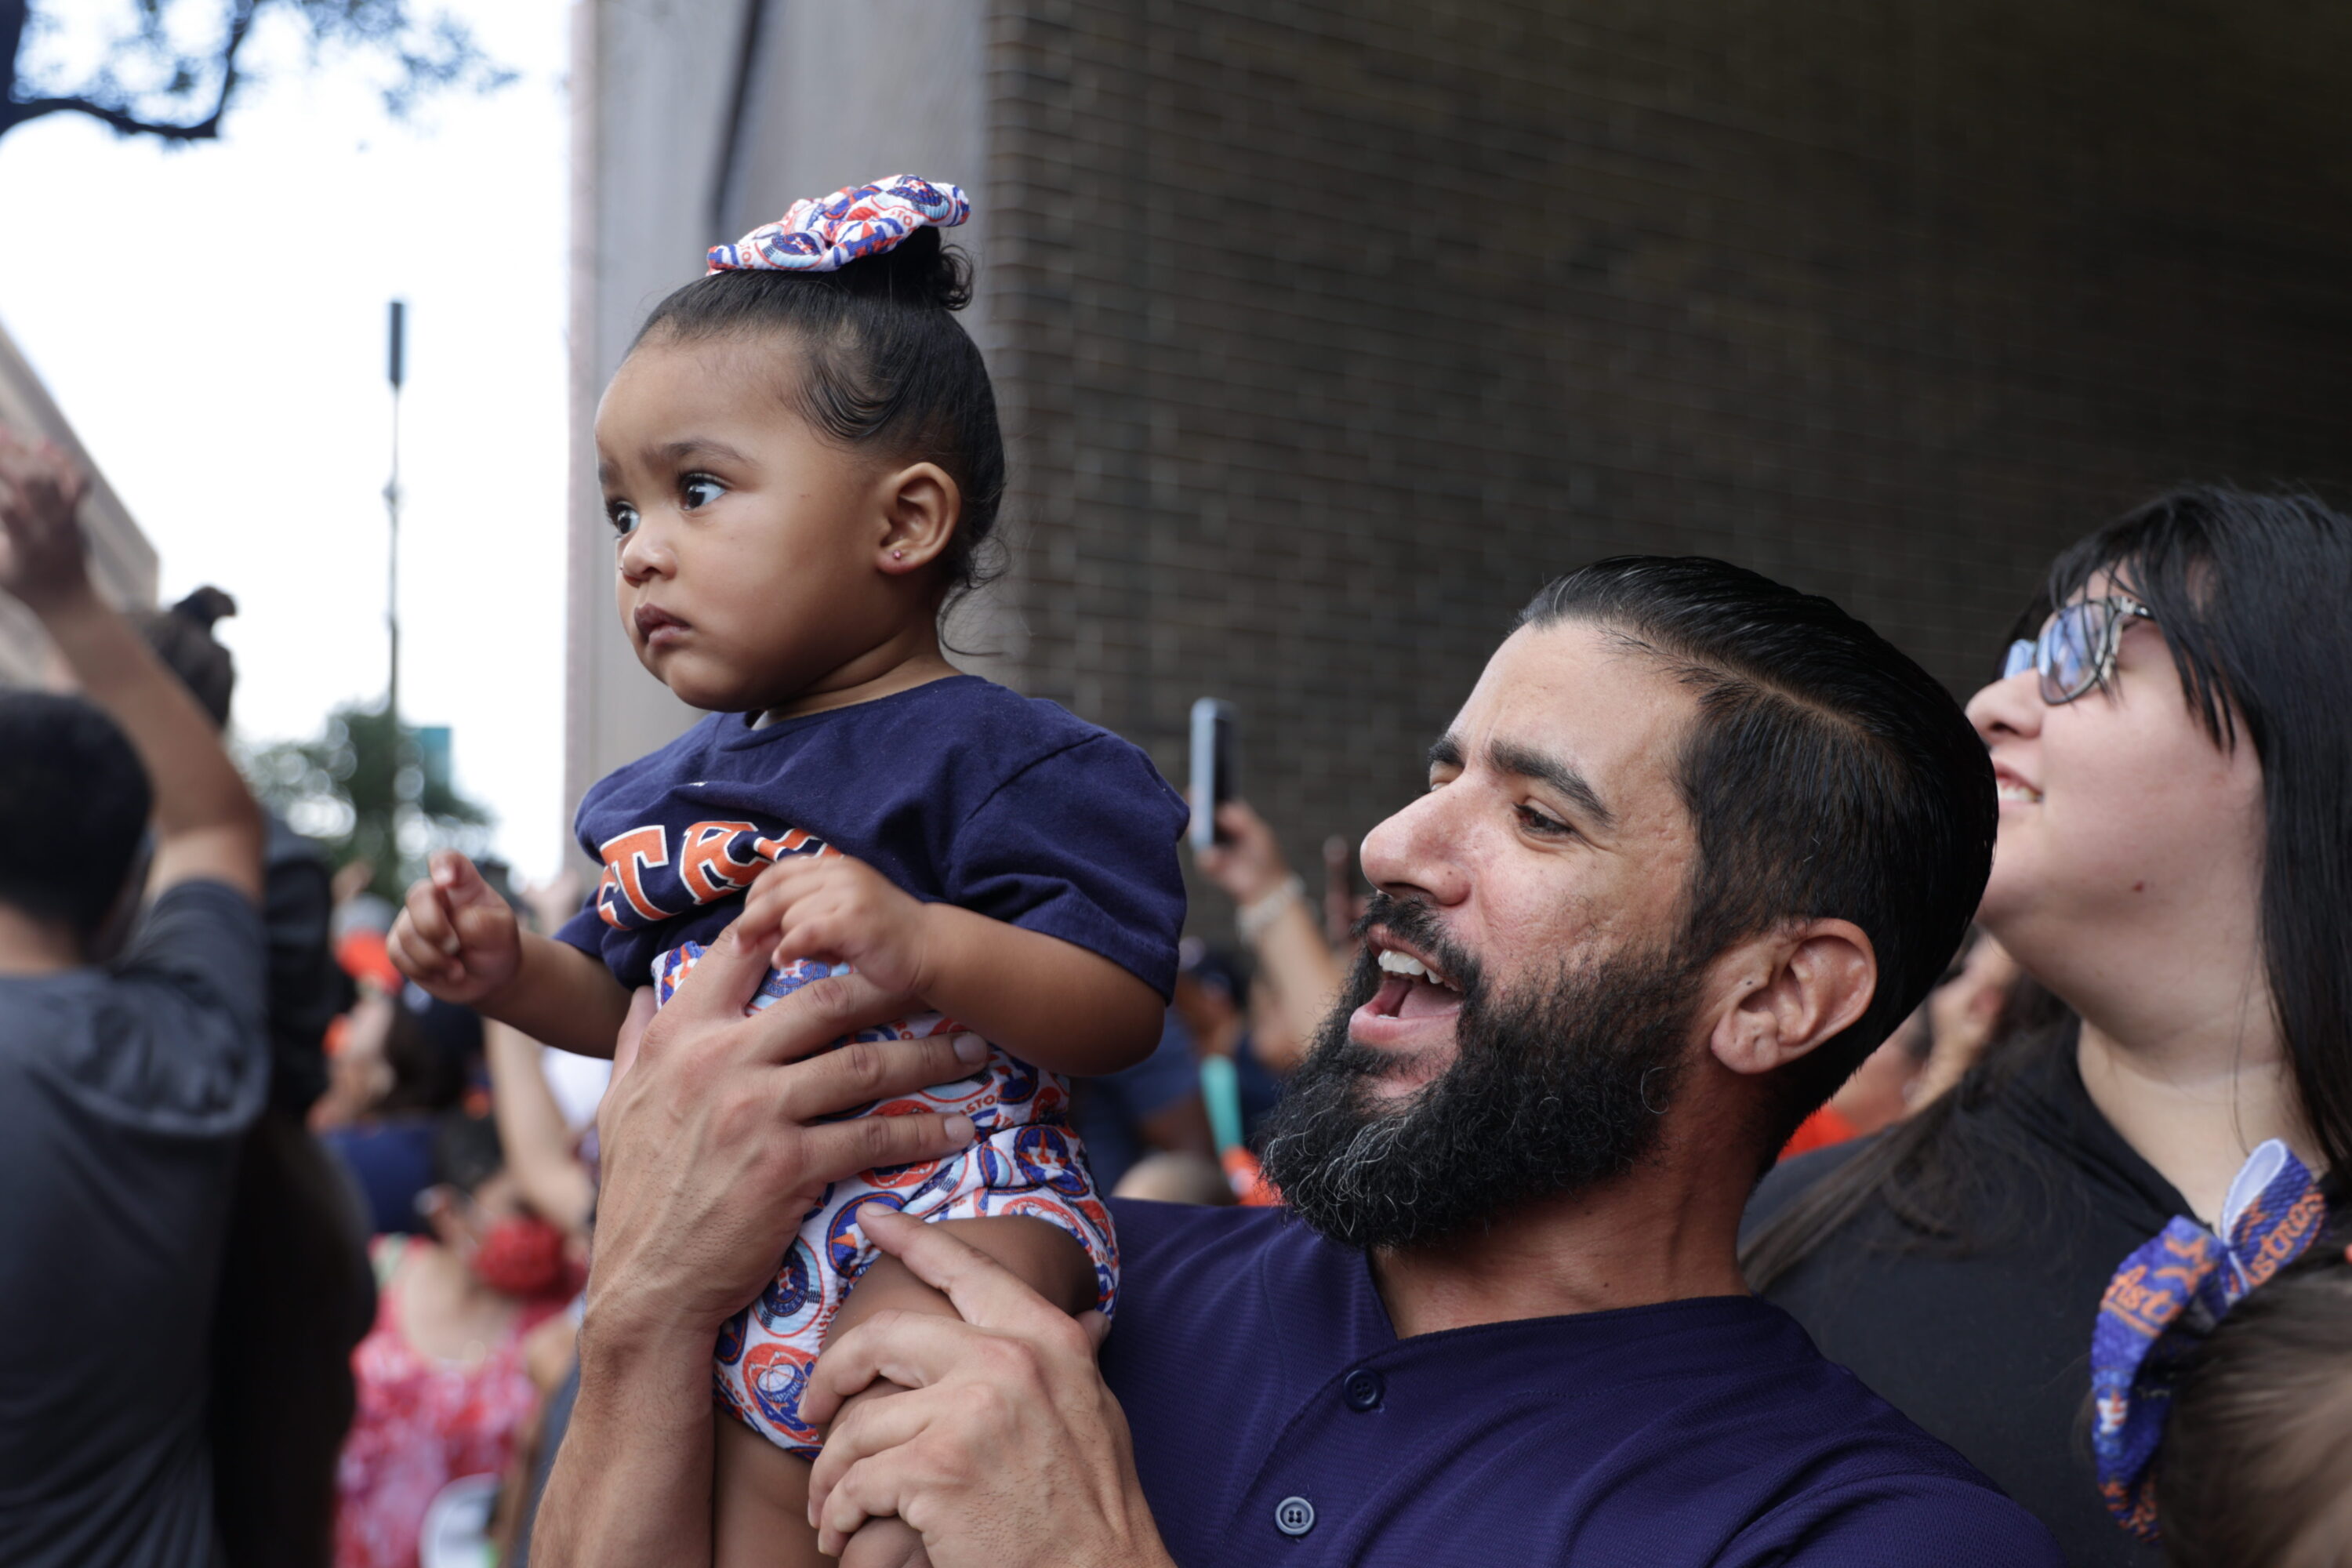 2022 World Series parade attendees pack downtown Houston streets - Houston  Business Journal